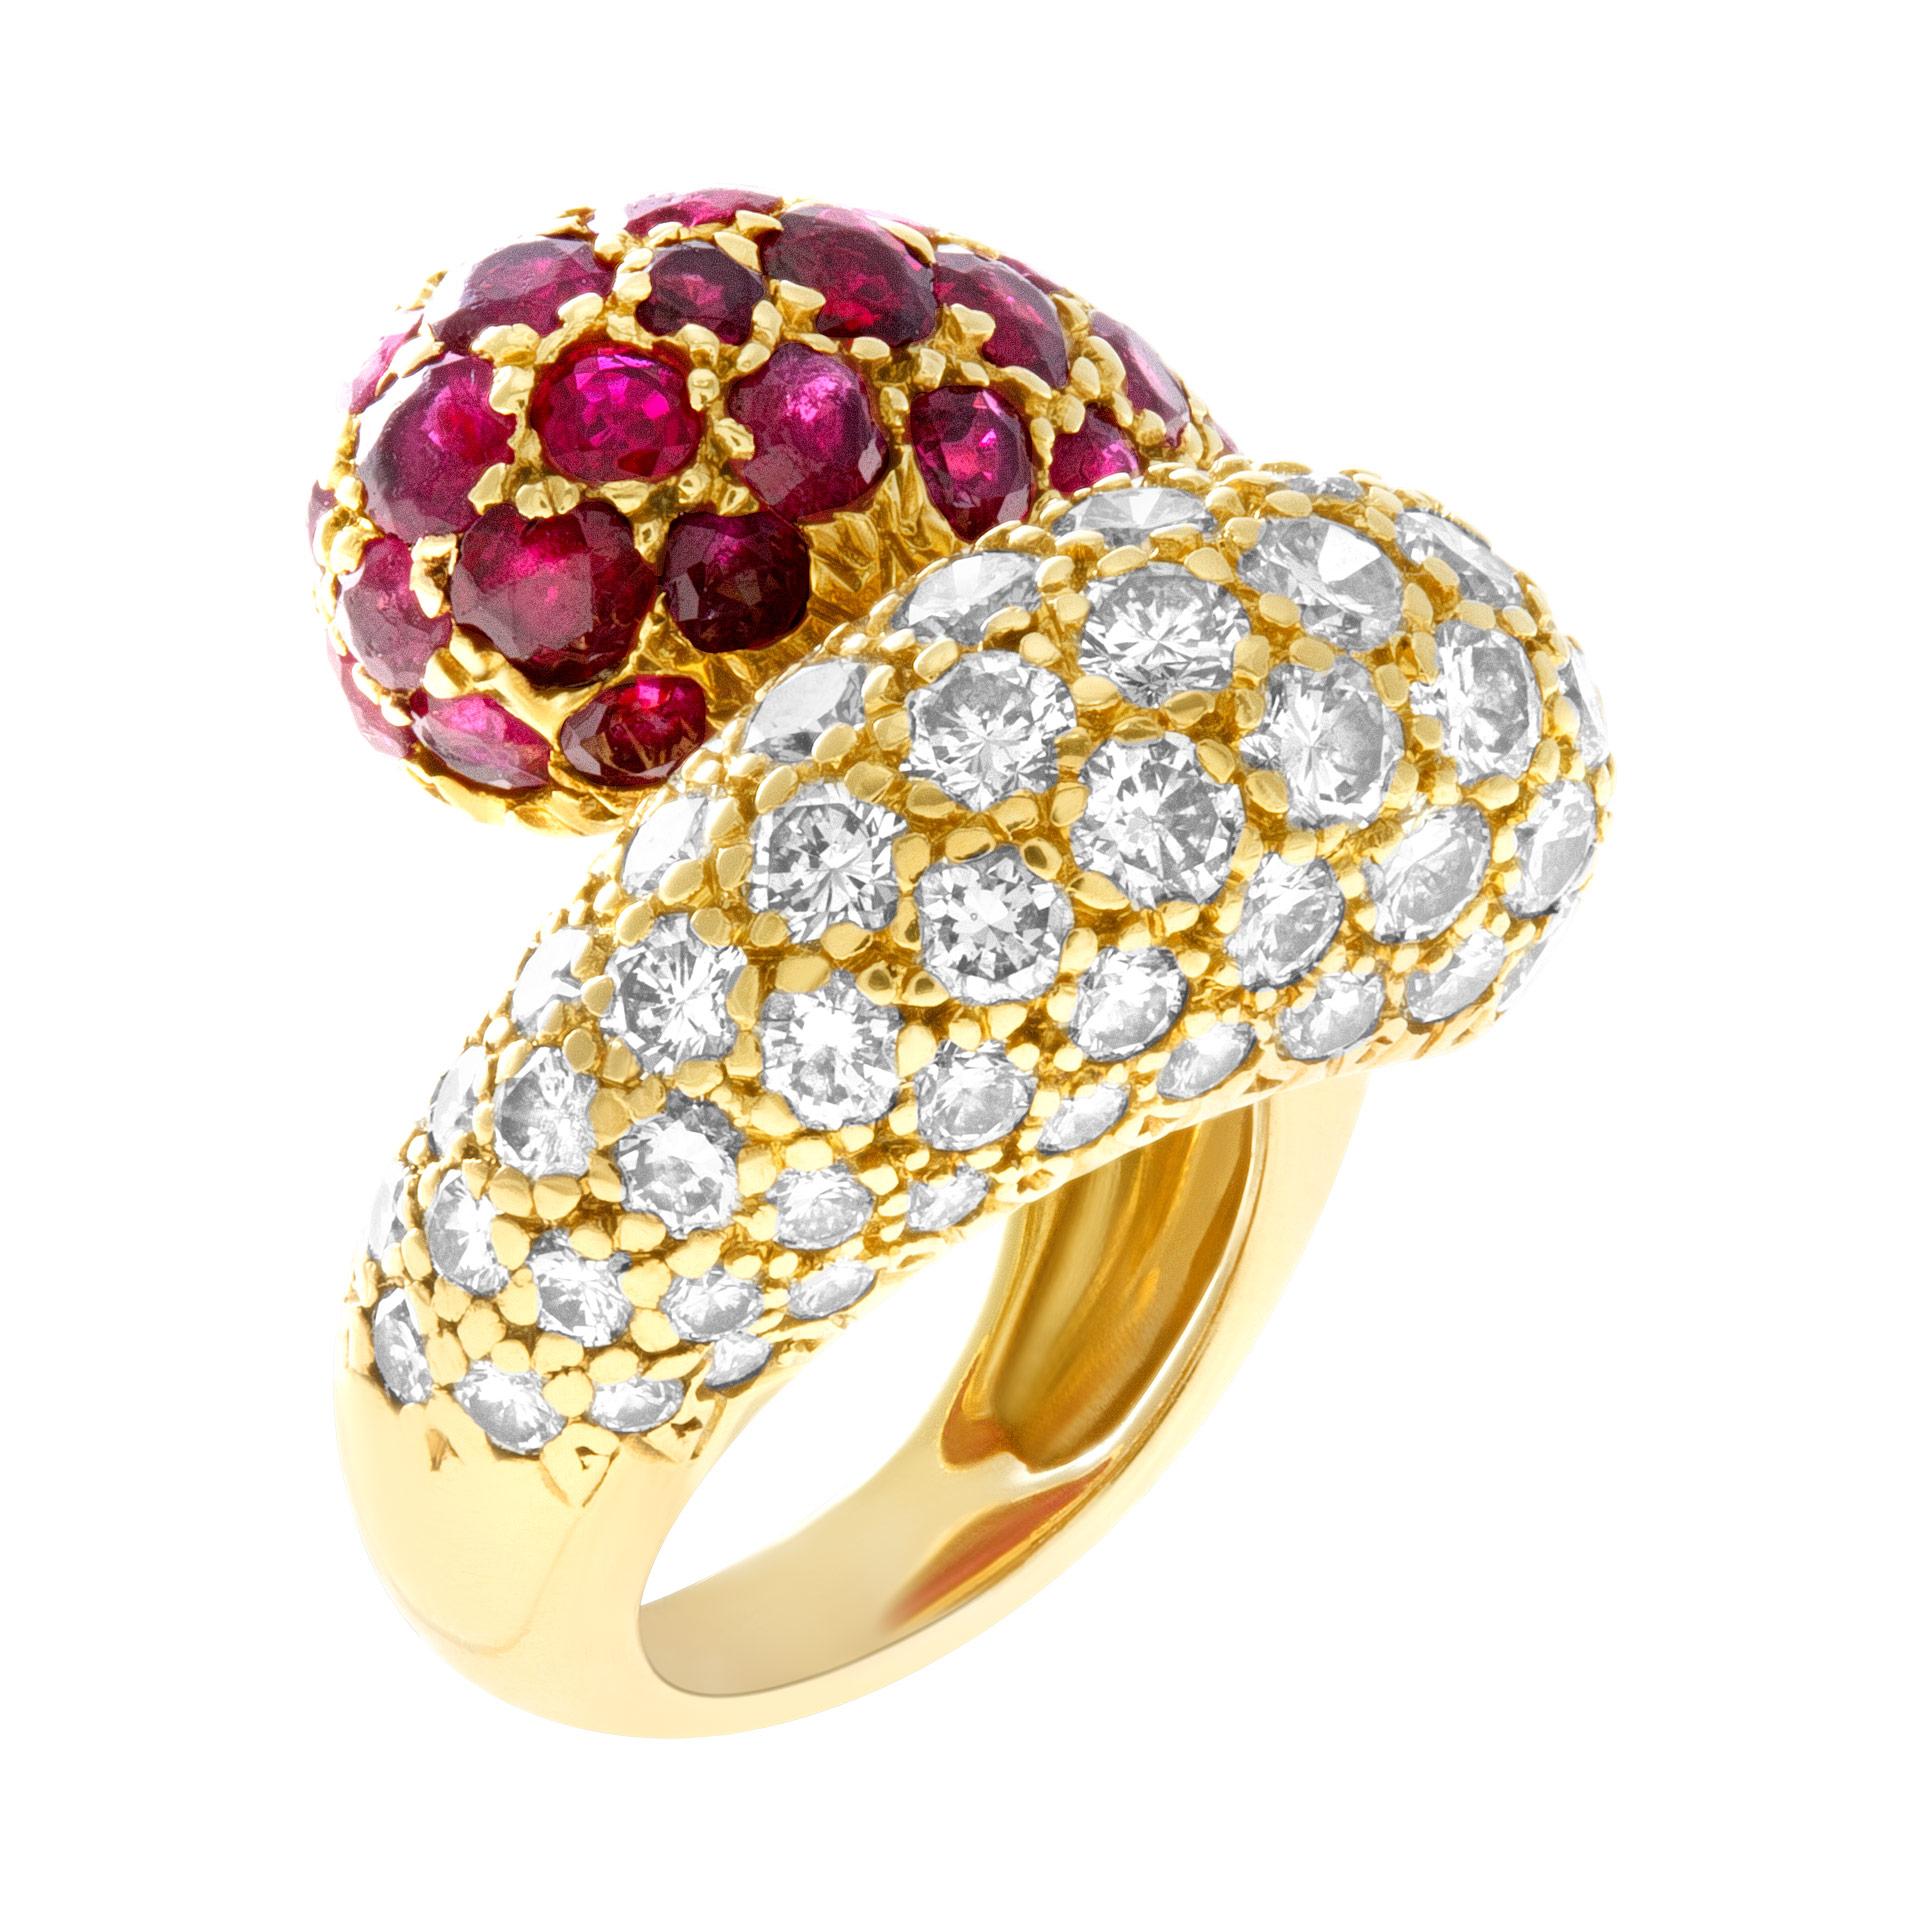 Lovely bypass ruby & diamond ring in 18k yellow gold with approxiimately 2.5 carats in diamonds and 3 carats in rubies. Width: 19.5mm. Size: 3.0 .  This Ruby ring is currently size 3 and some items can be sized up or down, please ask! It weighs 7.6